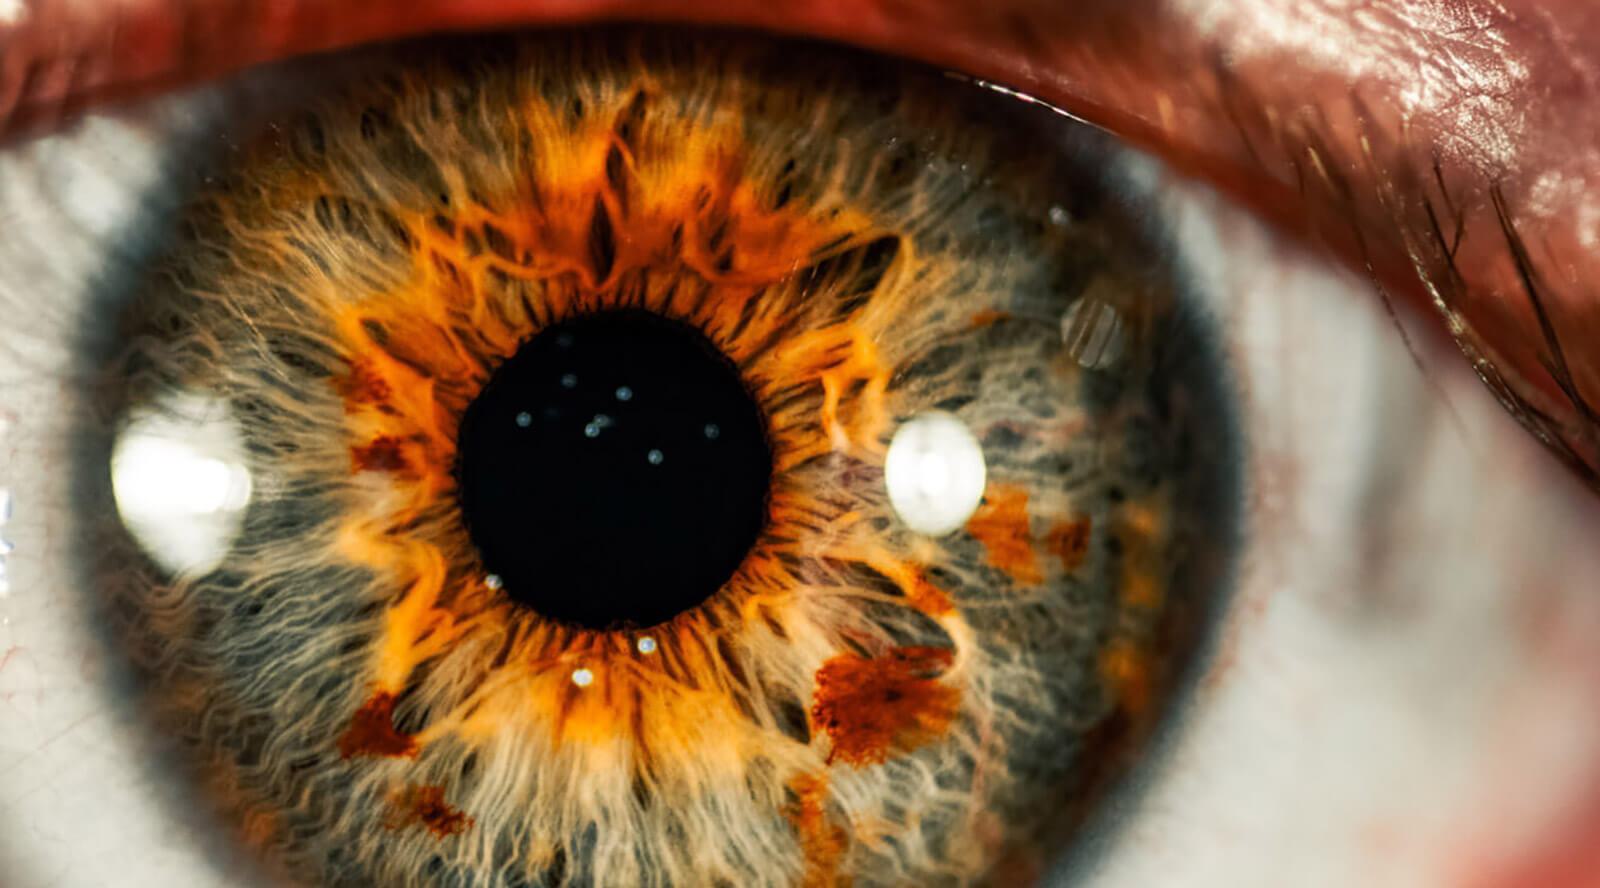 Close-up of the human eye with colorful gold iris